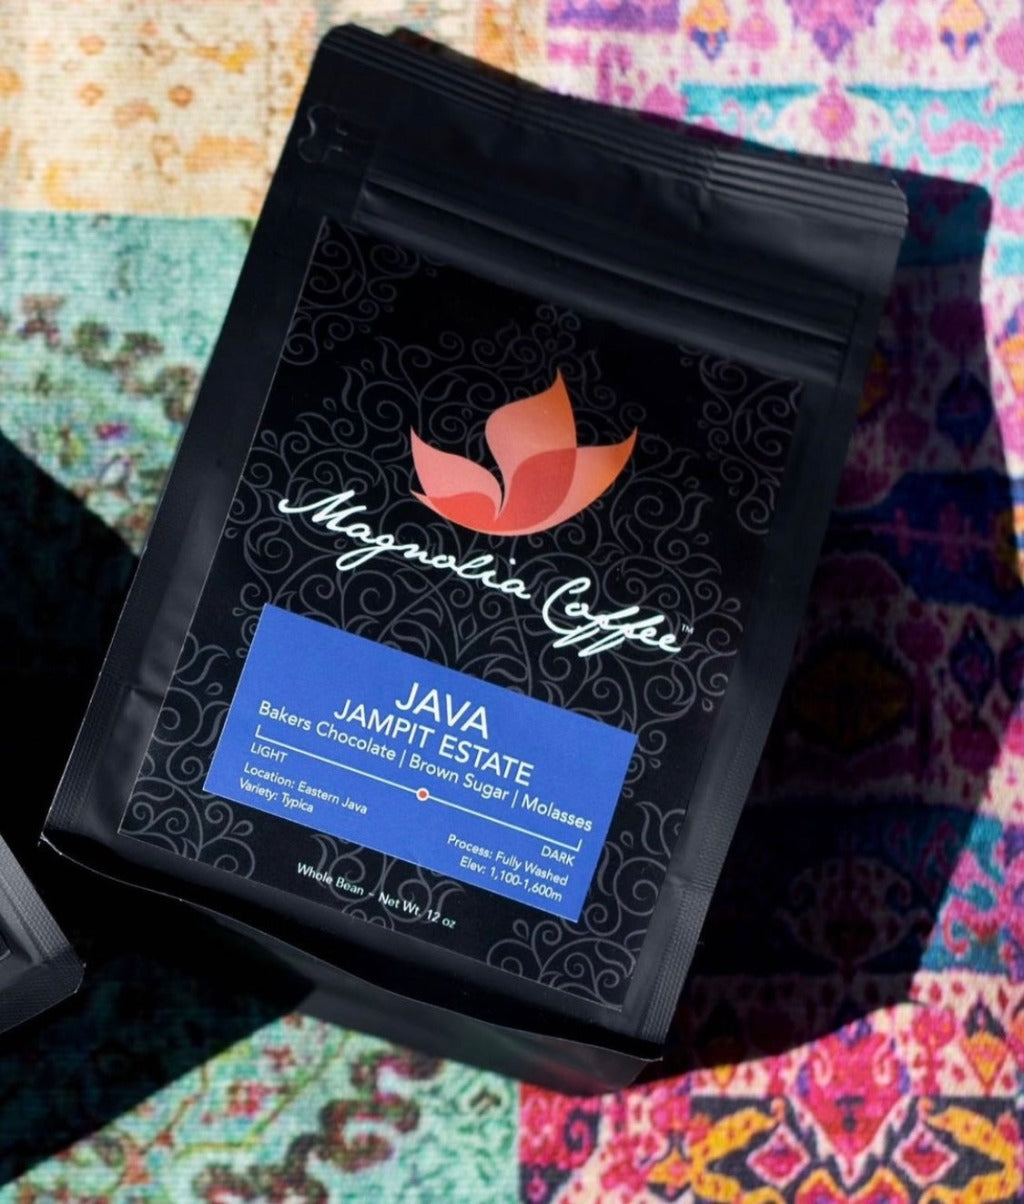 Java Jampit Estate - new! Notes of chocolate, brown sugar, molasses. Makes delicious Cold Brew.